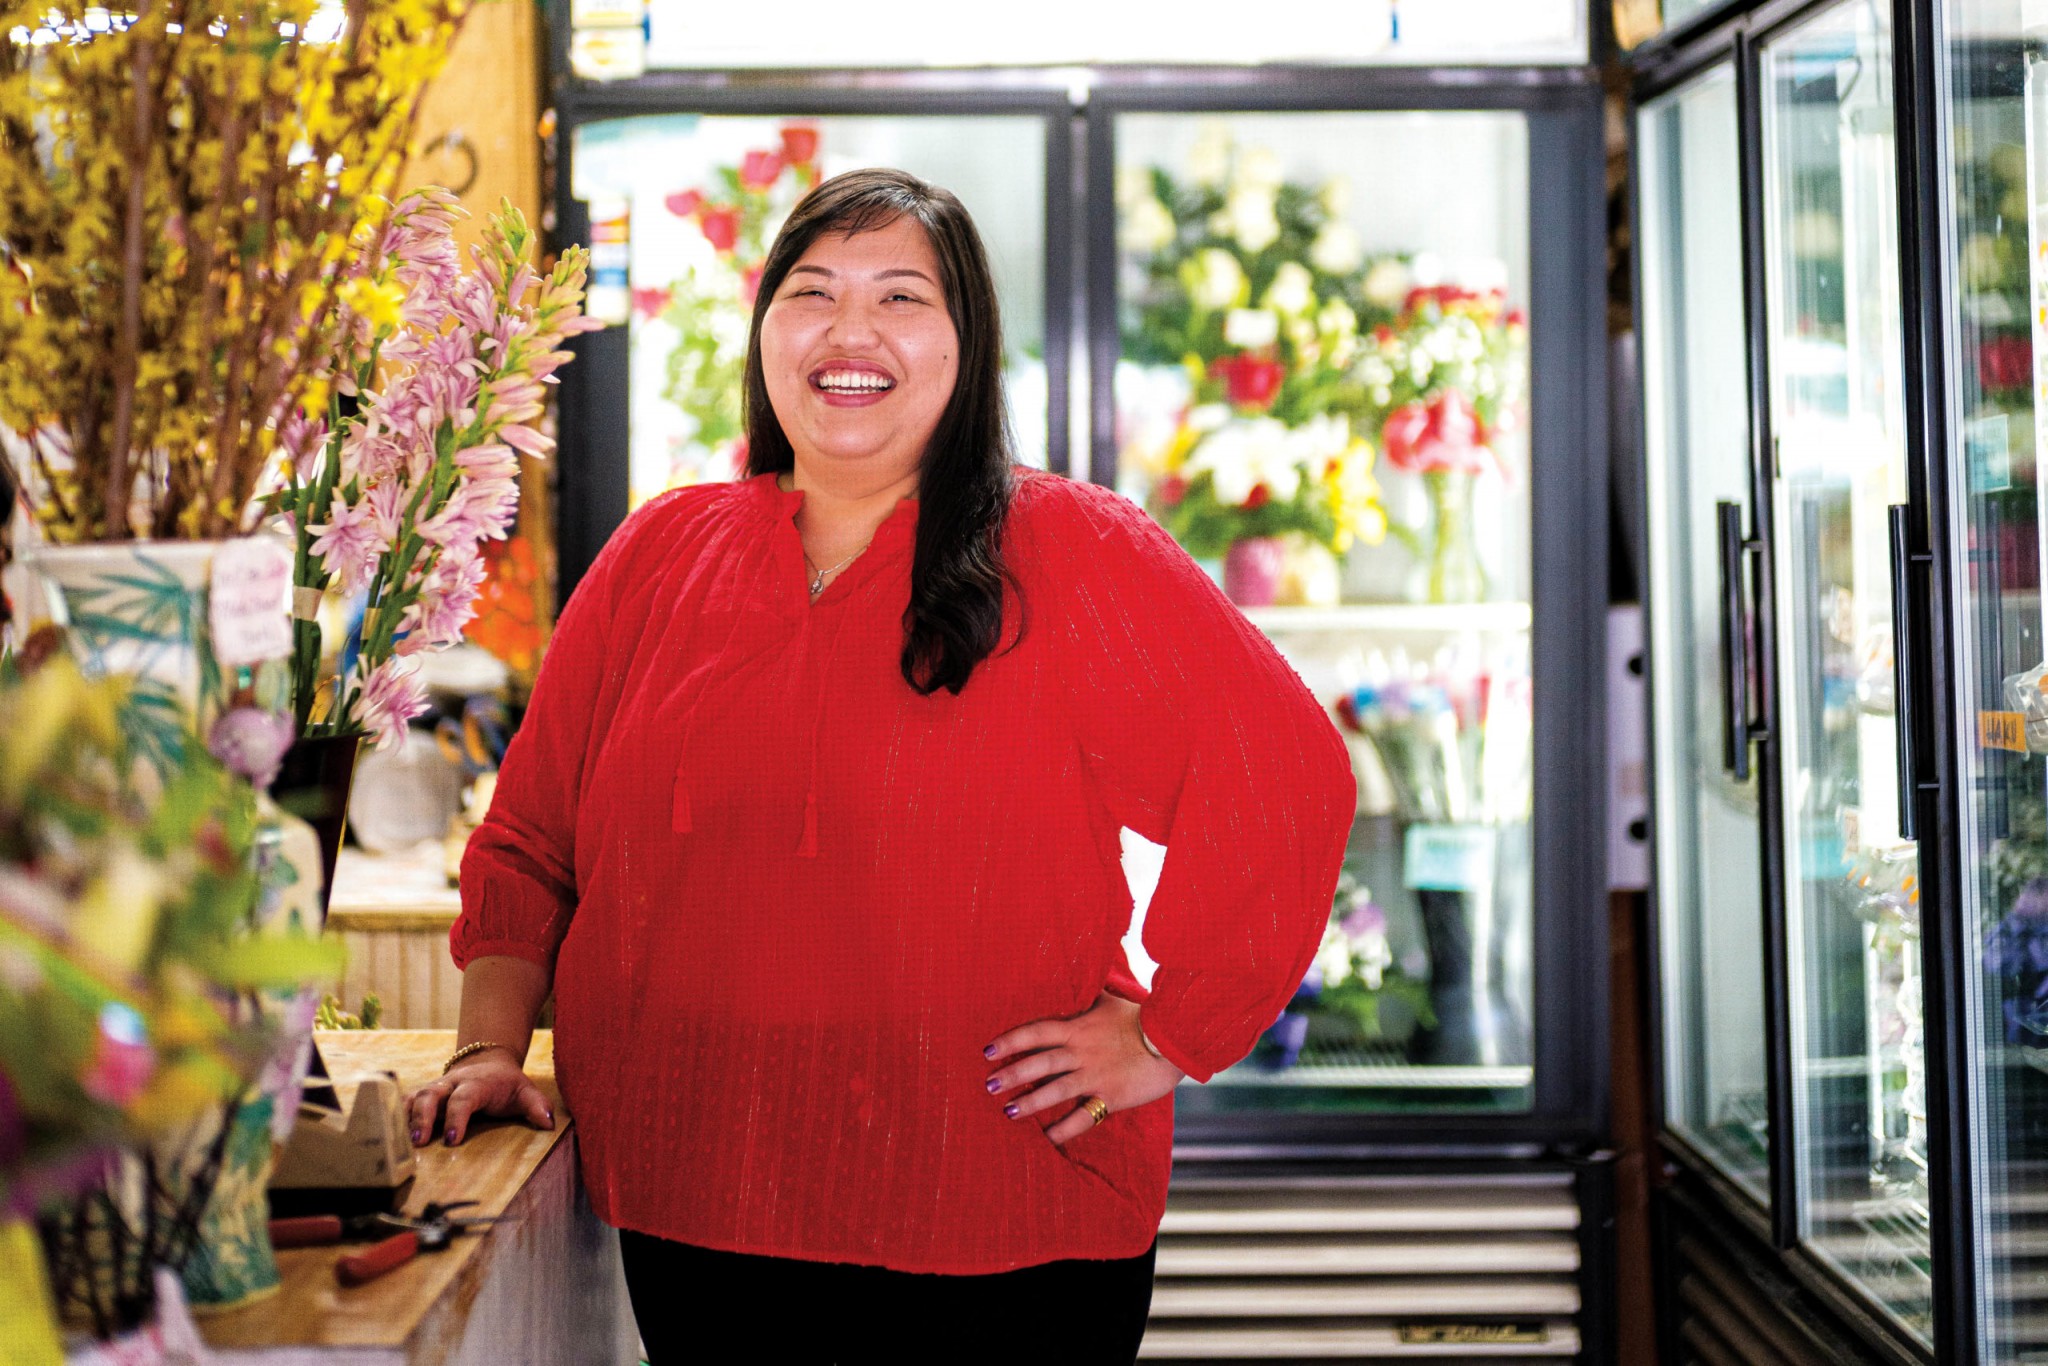 20 For The Next 20 Lina Le Y Hata And Co Ltd Hawaii Business Magazine